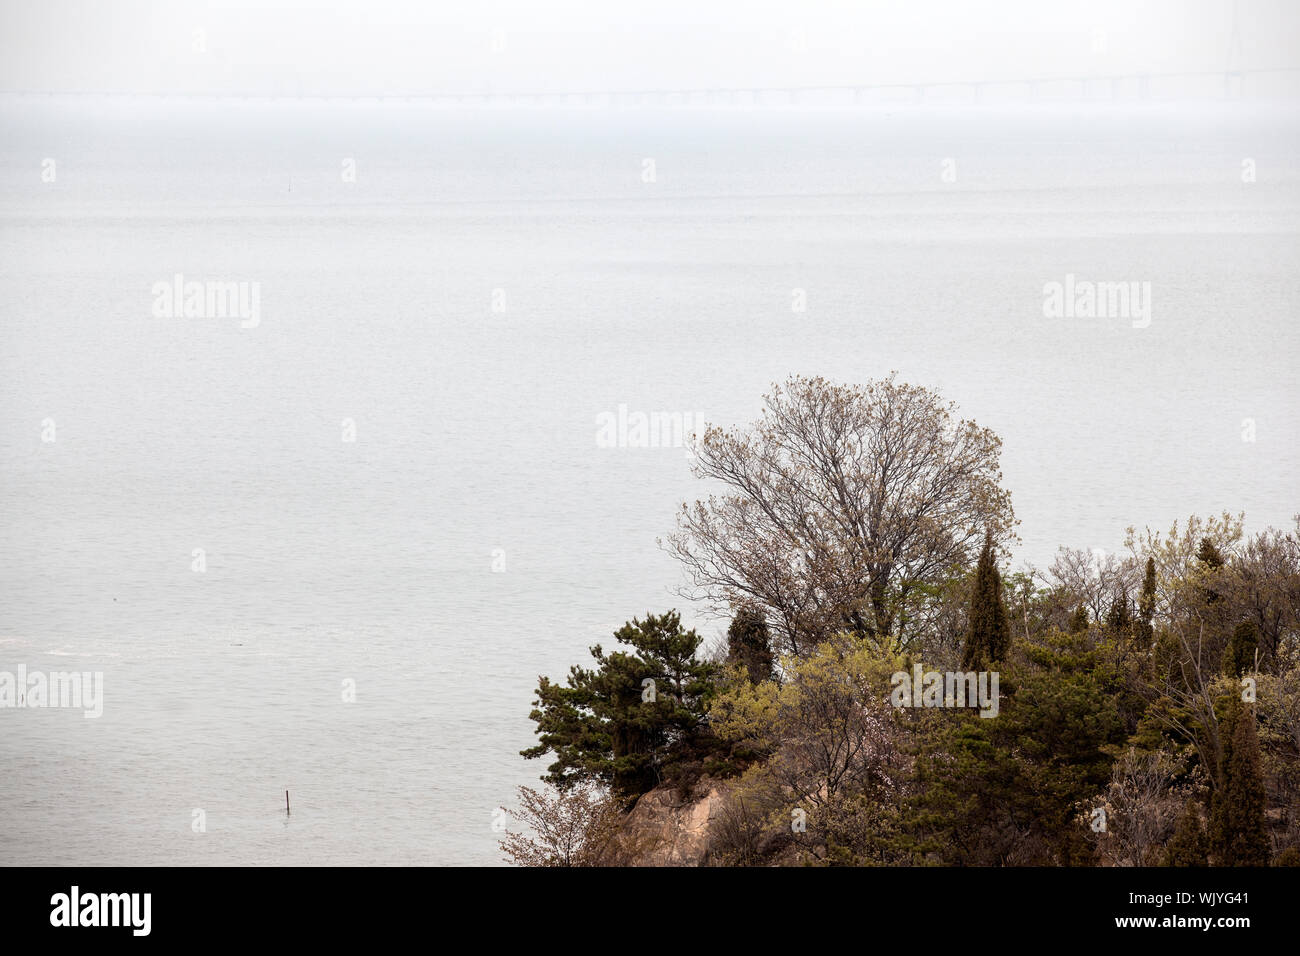 View Of Overcast Sky Blending Into Seascape In Autumn Stock Photo